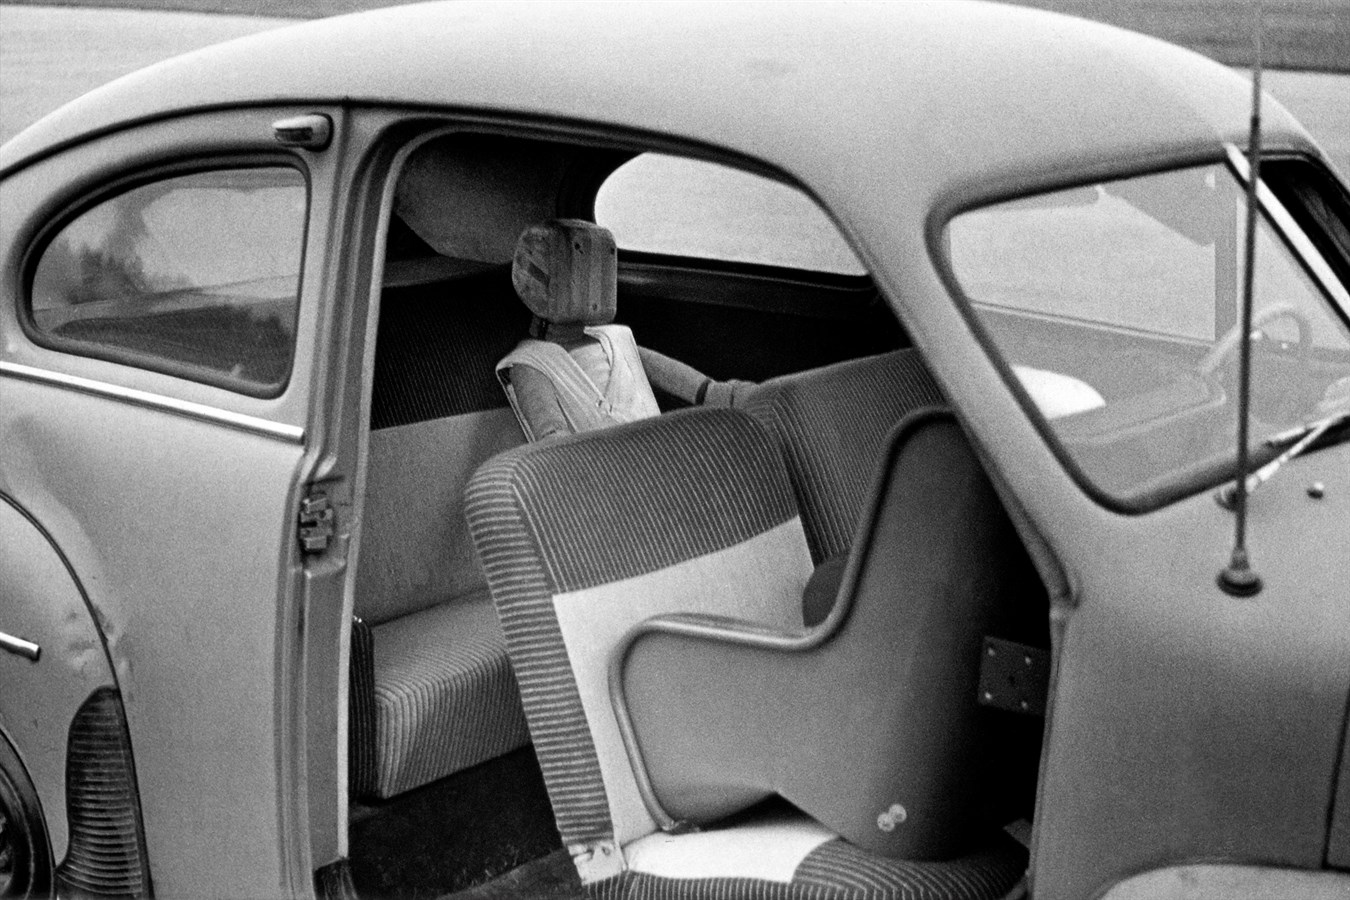 First rearward facing child safety seat prototype tested in a Volvo (PV 444)